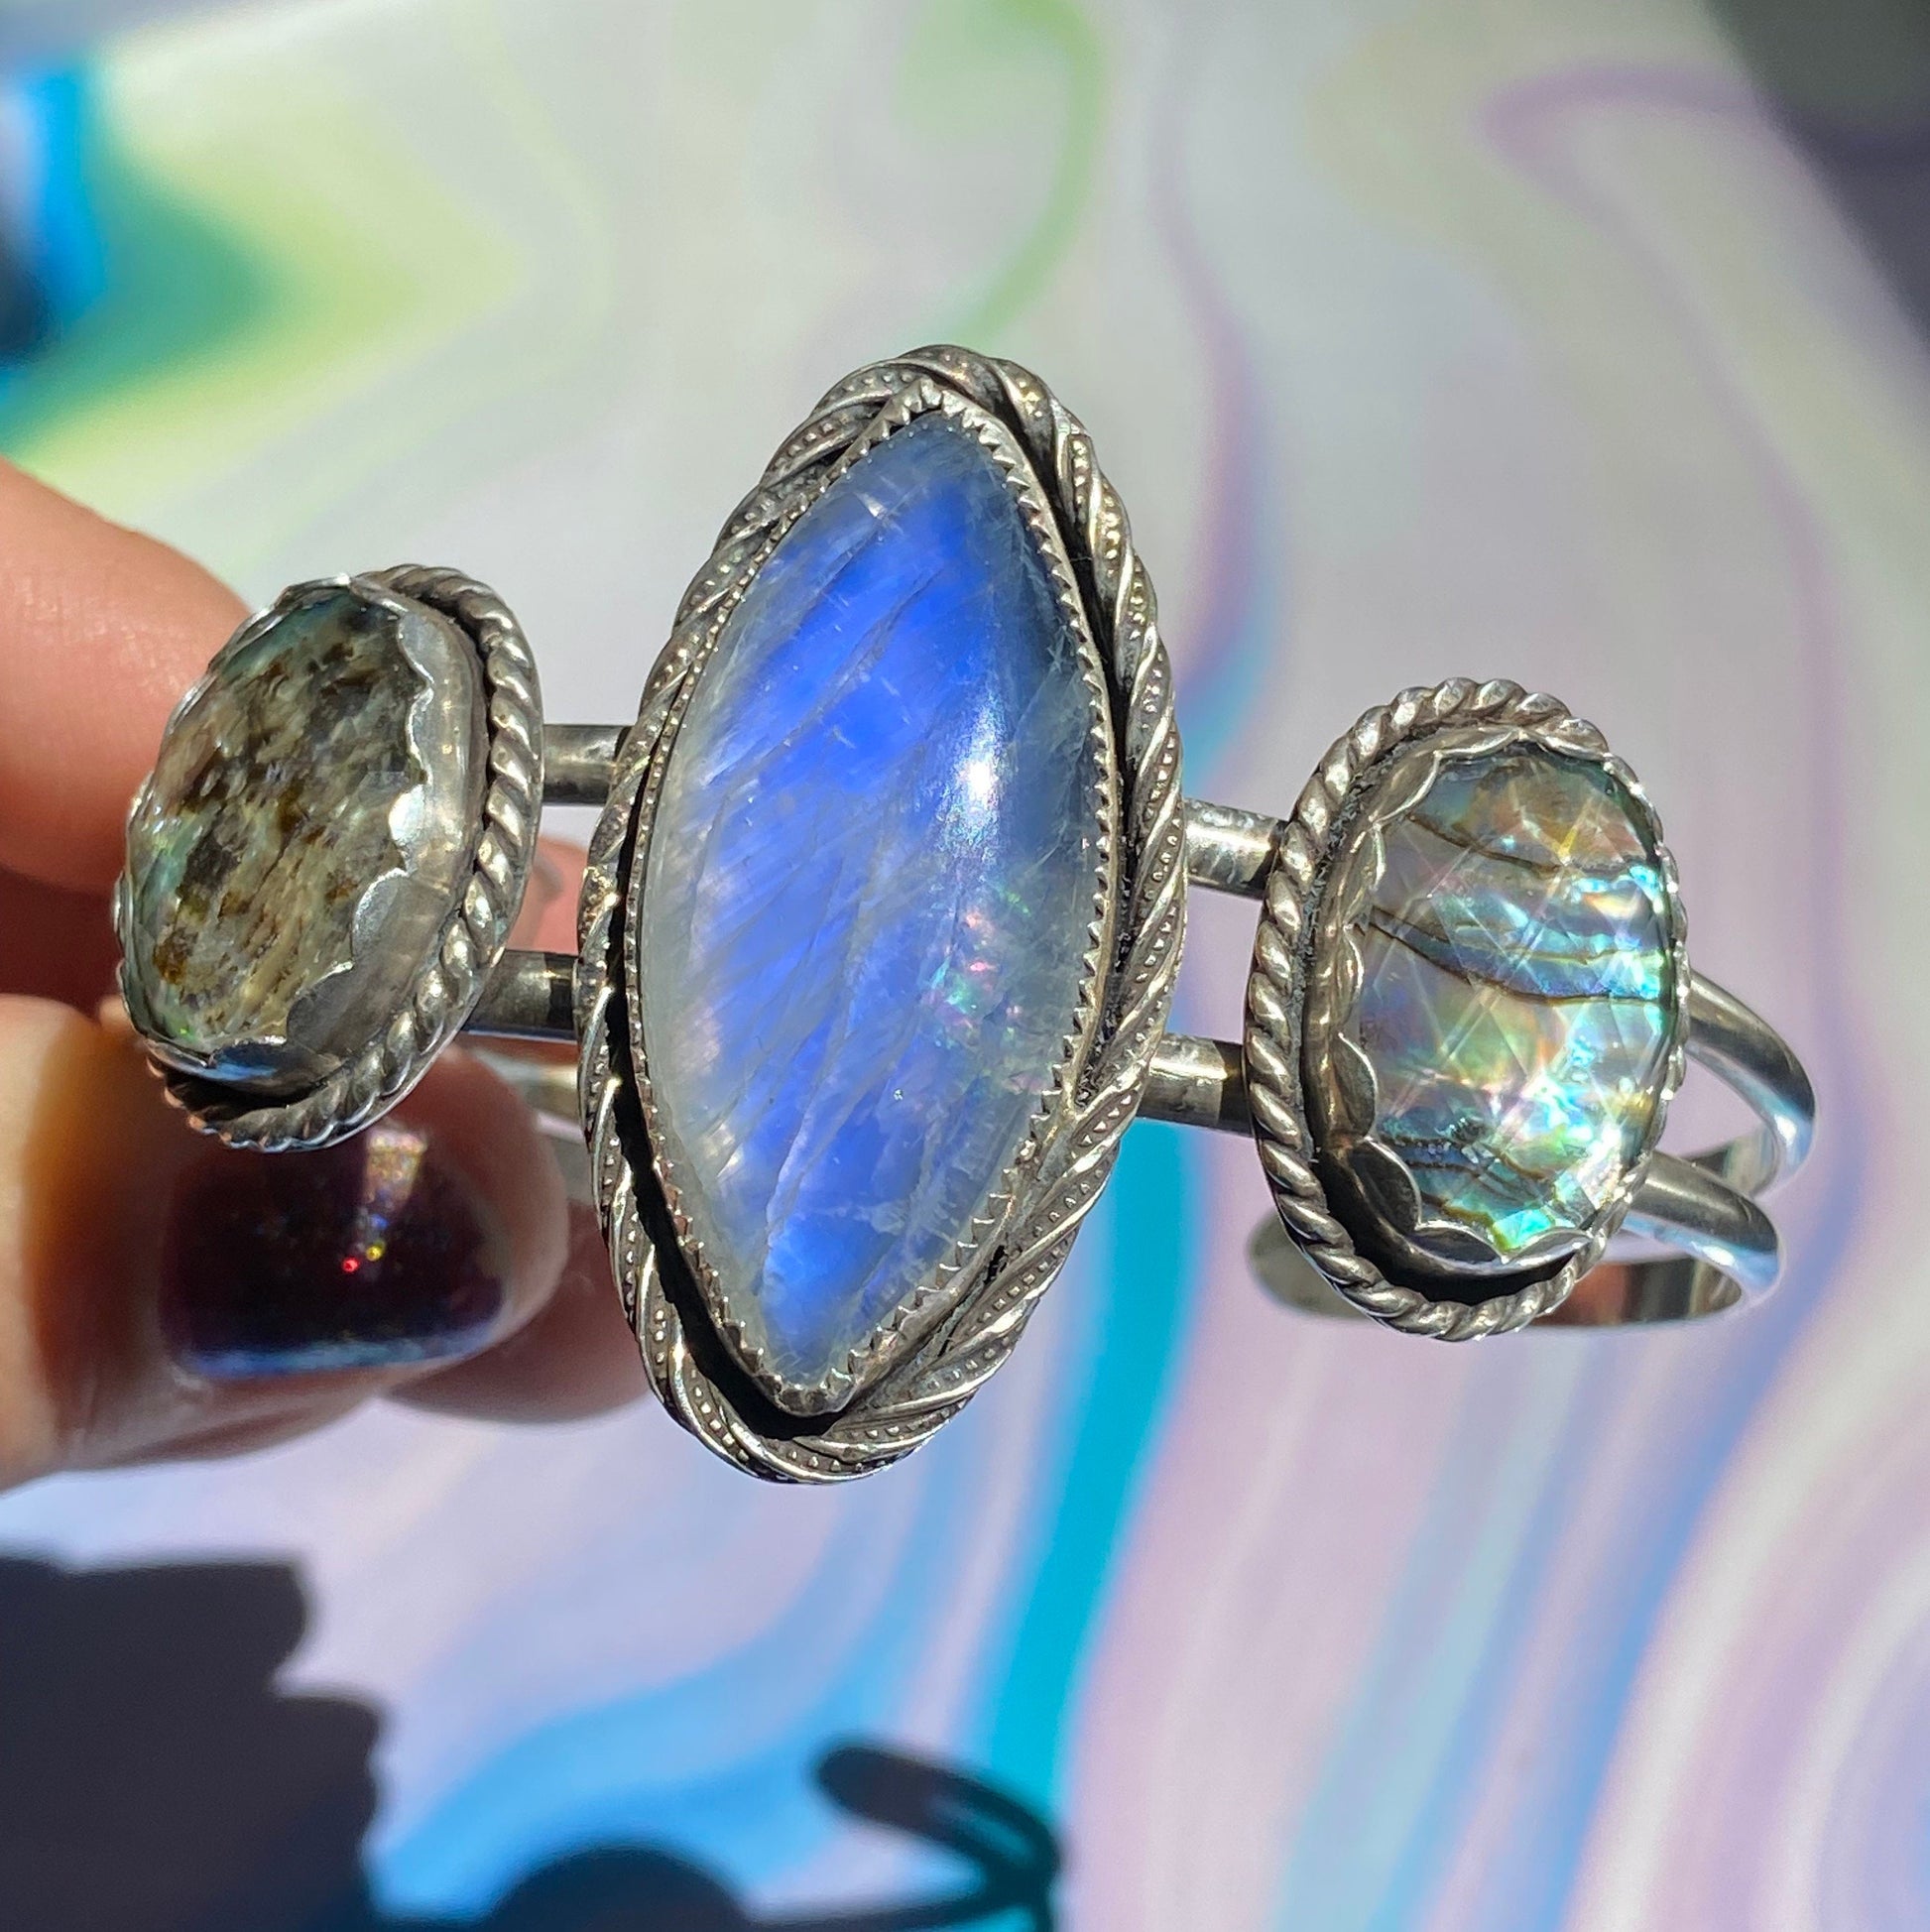 Moonstone and Abalone/Quartz Dream Collecti Doublet a thebohemianfairie Upon Cuff //Once –